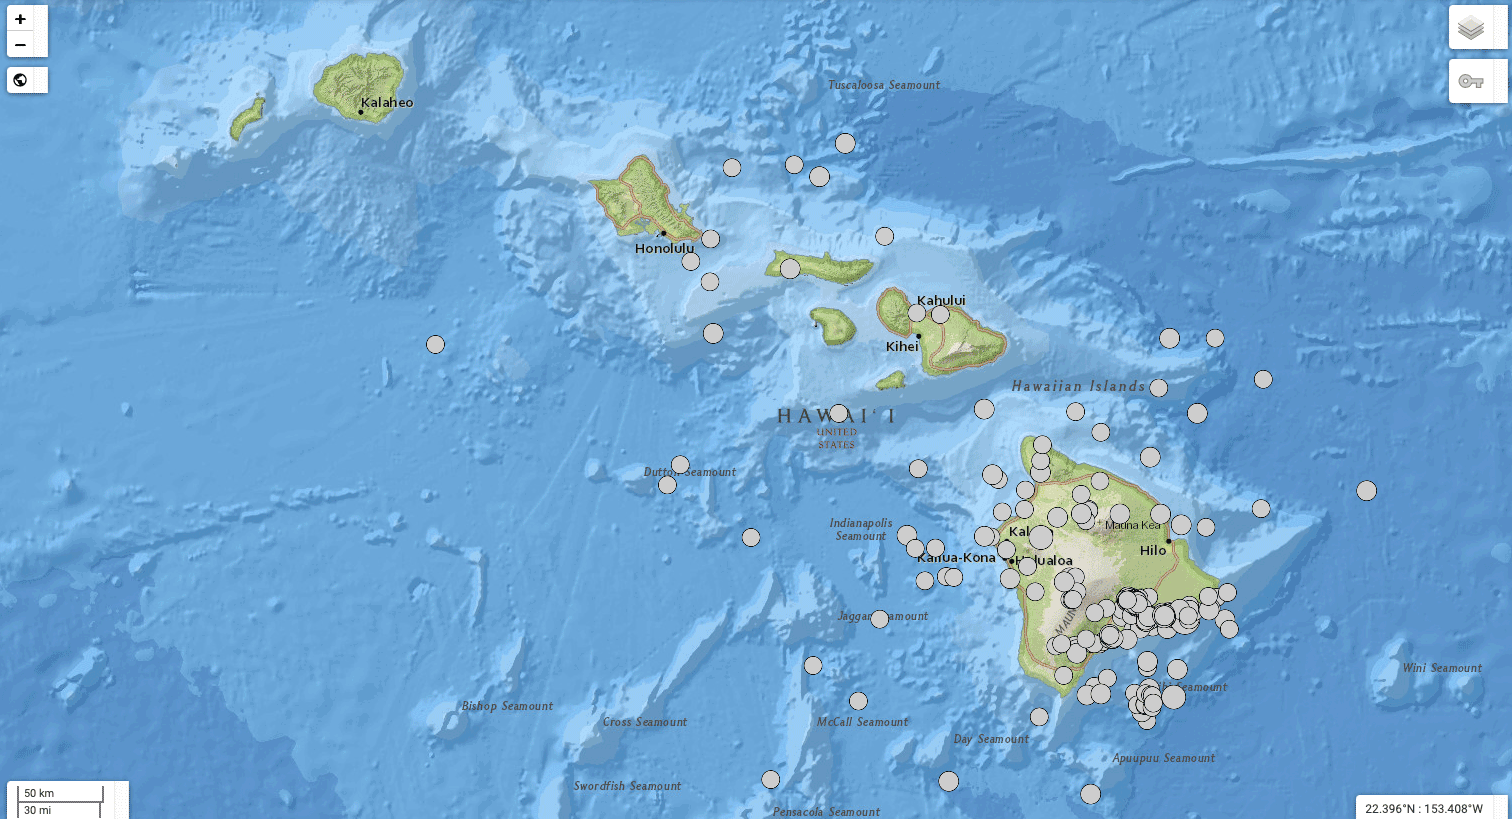 Map of Hawaii showing locations of earthquakes of M3.5 or greater between 2011-2021.